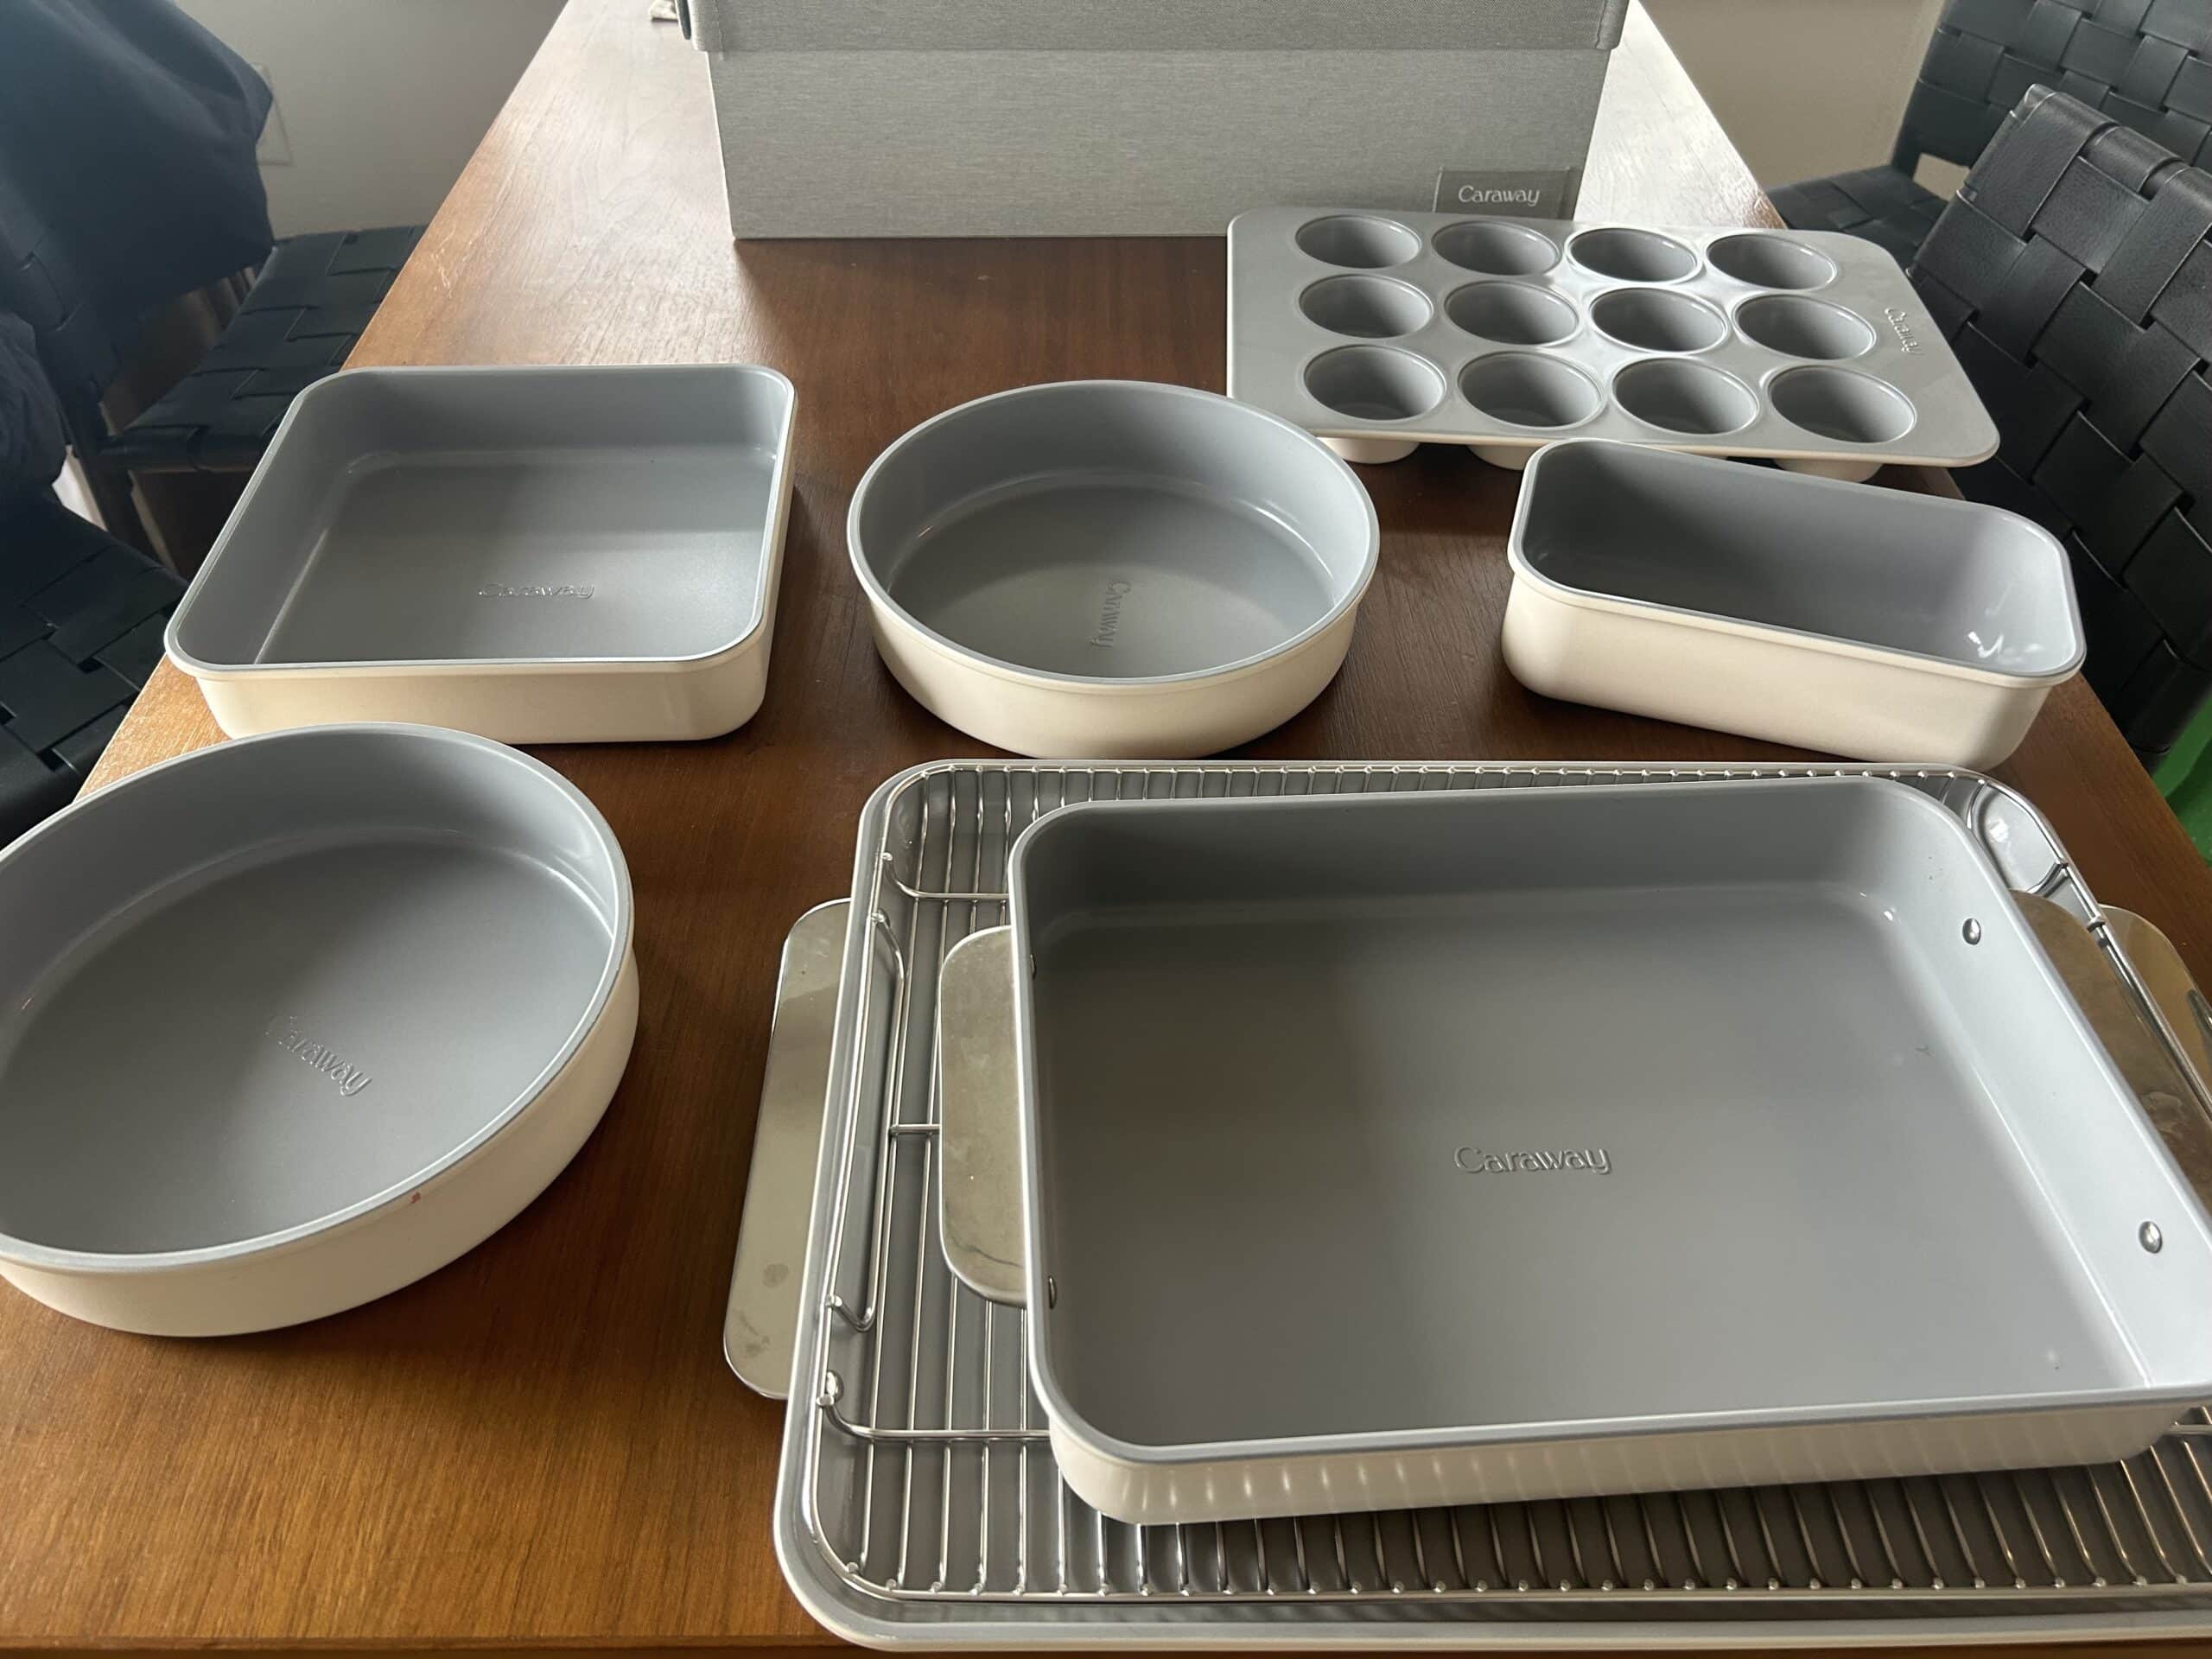 https://www.leafscore.com/wp-content/uploads/2022/12/Caraway-bakeware-scaled.jpg